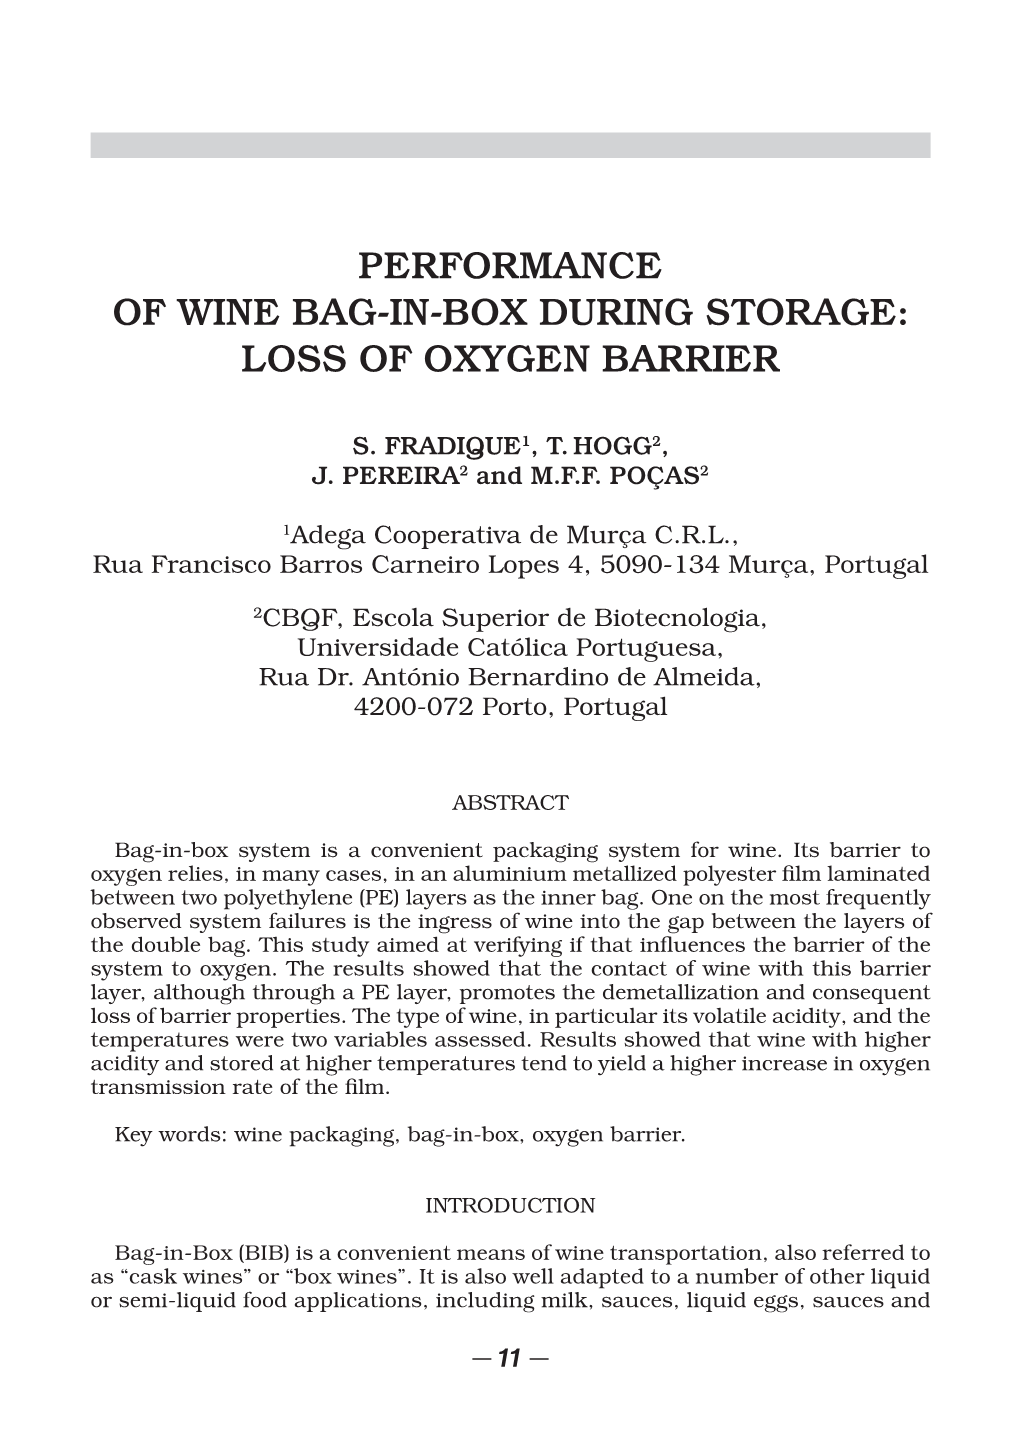 Performance of Wine Bag-In-Box During Storage: Loss of Oxygen Barrier